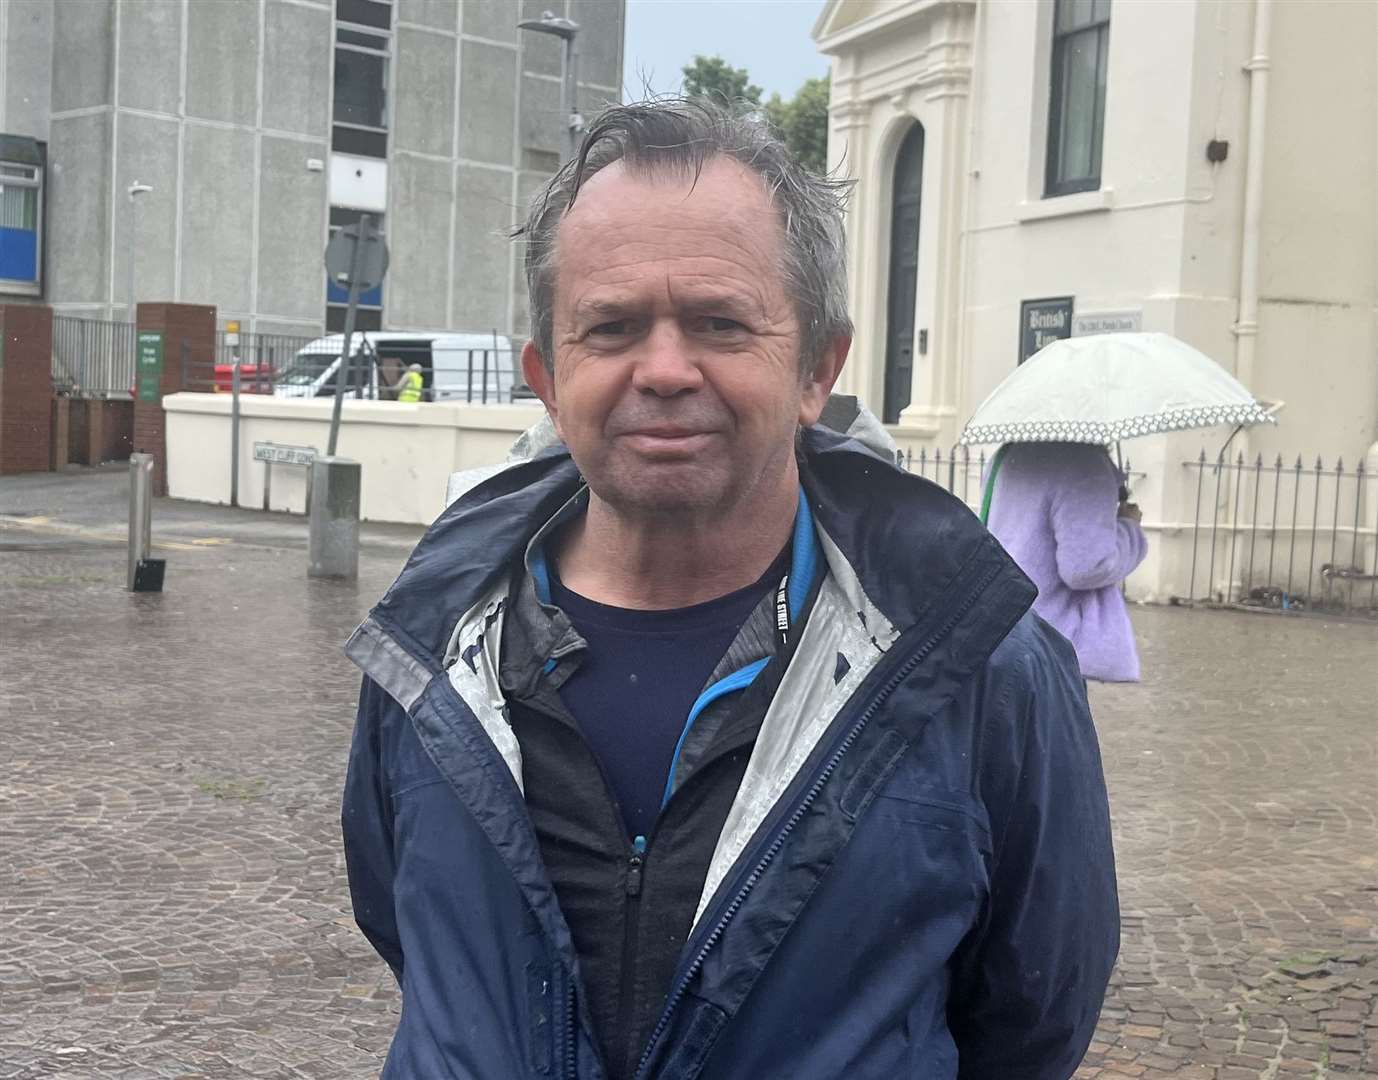 Peter Jackson, 67, thinks more effort should be made to protect Folkestone's older buildings instead of adding new-builds